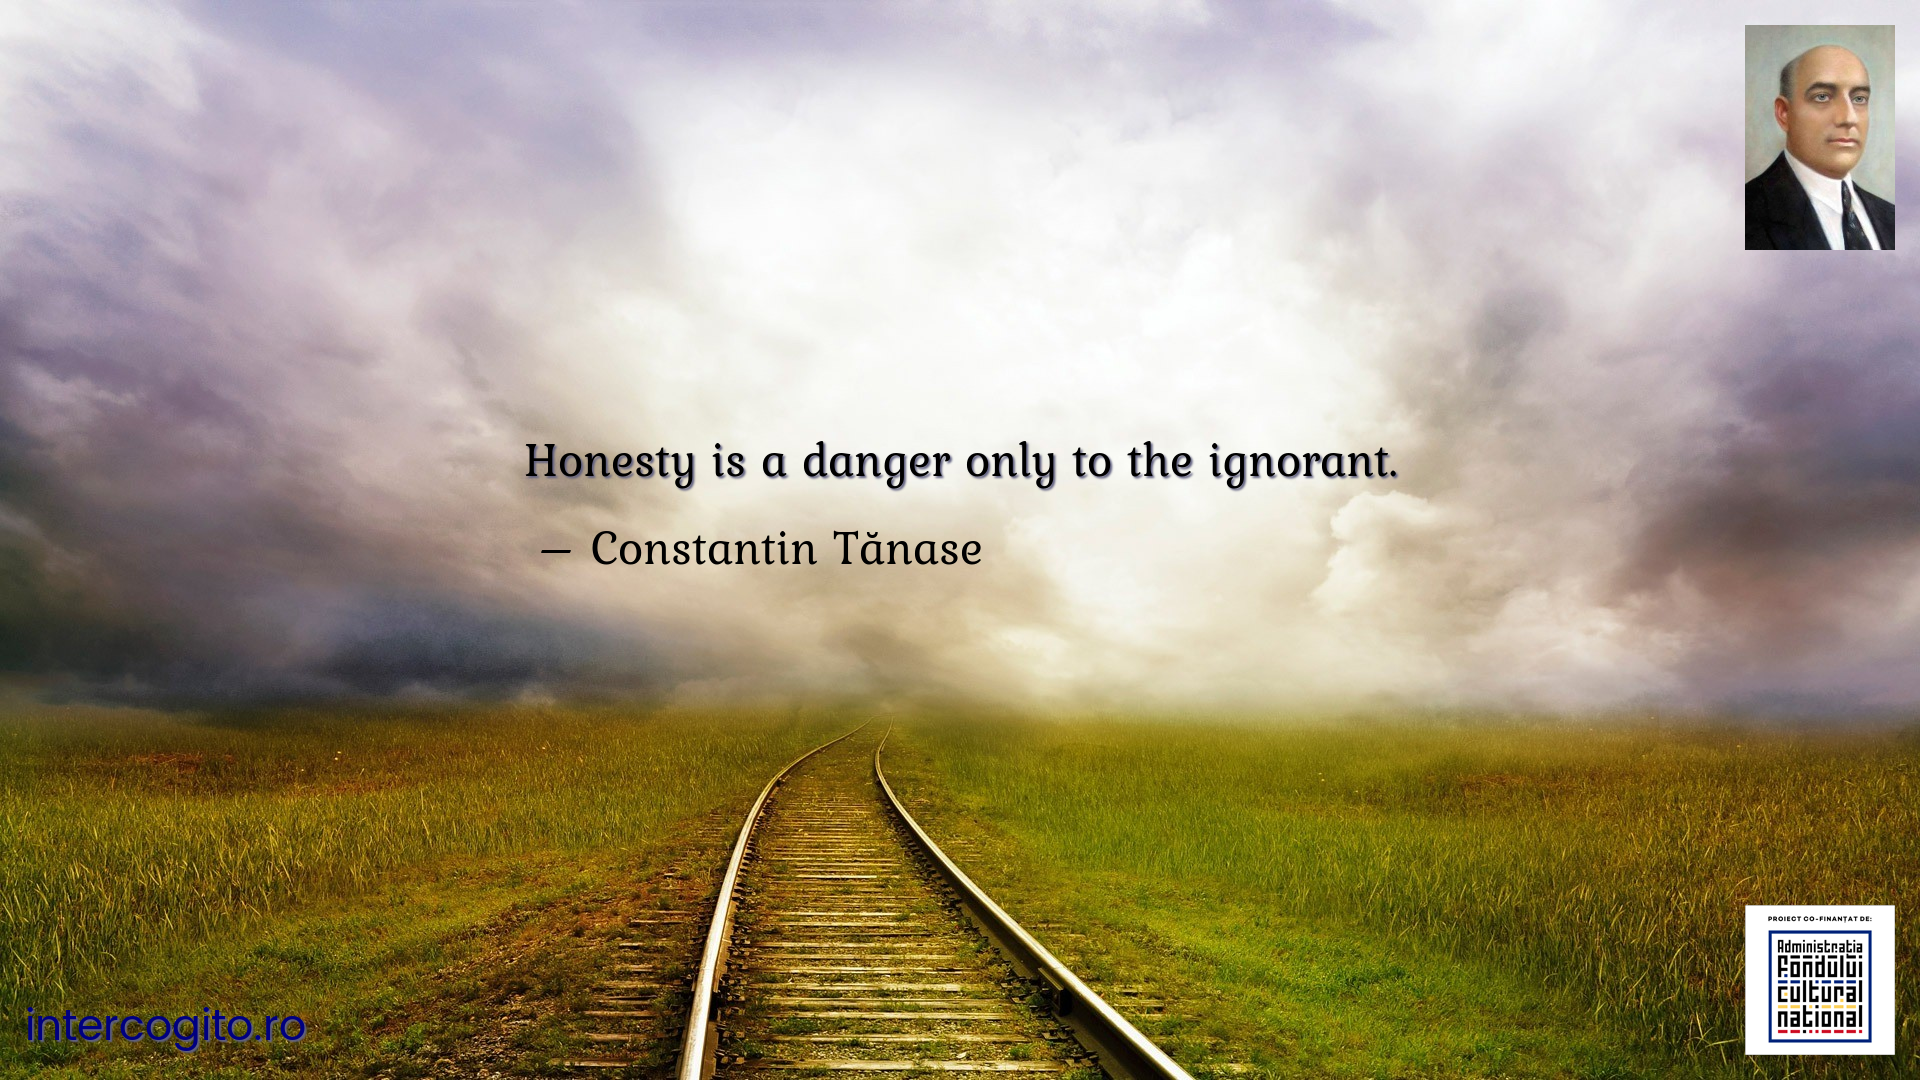 Honesty is a danger only to the ignorant.